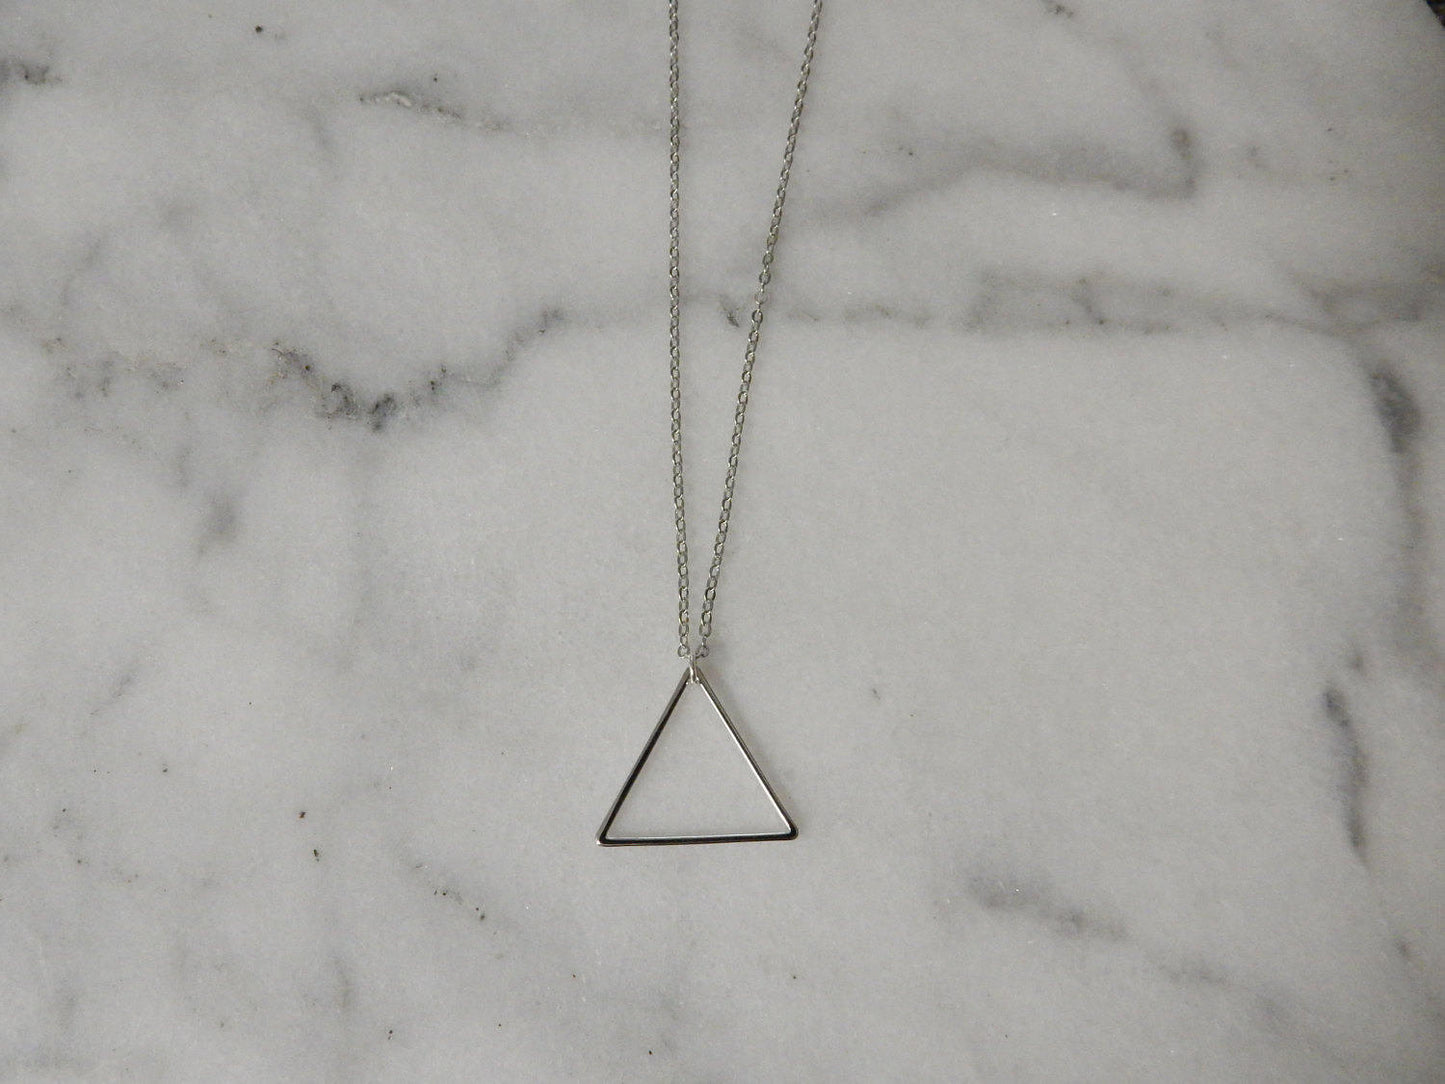 Mistic Triangle Necklace